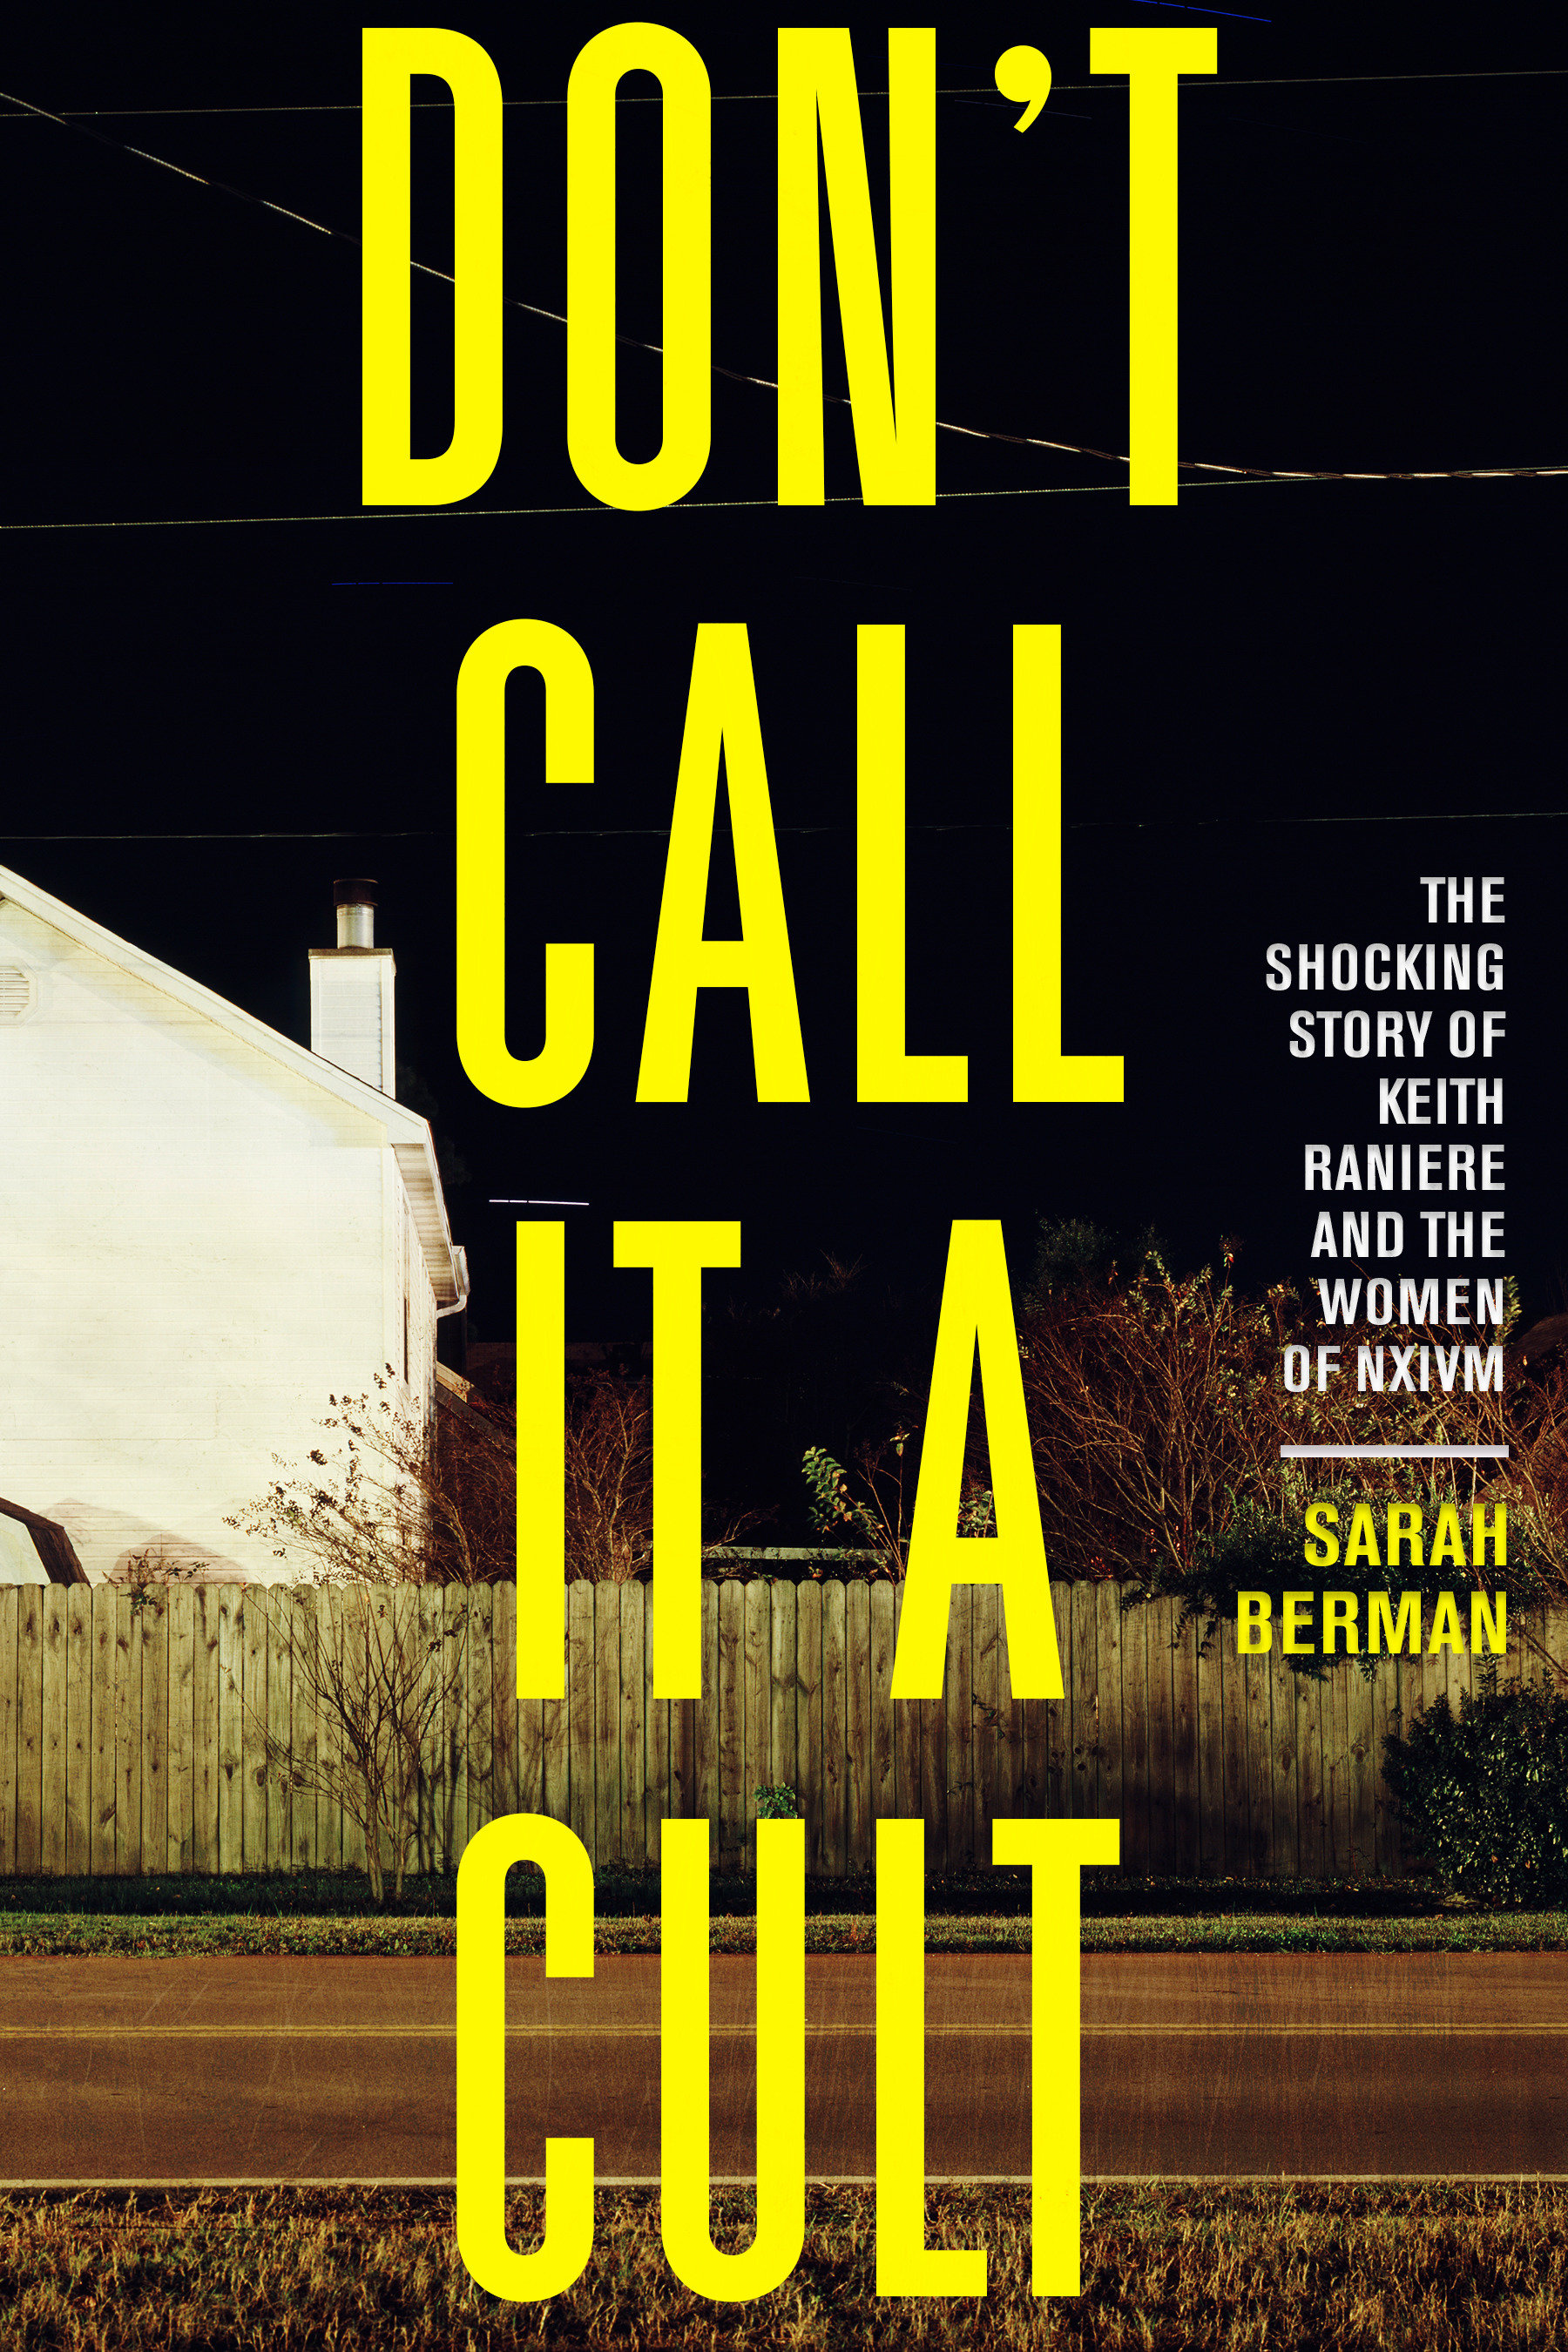 Cover image for Don't Call it a Cult [electronic resource] : The Shocking Story of Keith Raniere and the Women of NXIVM